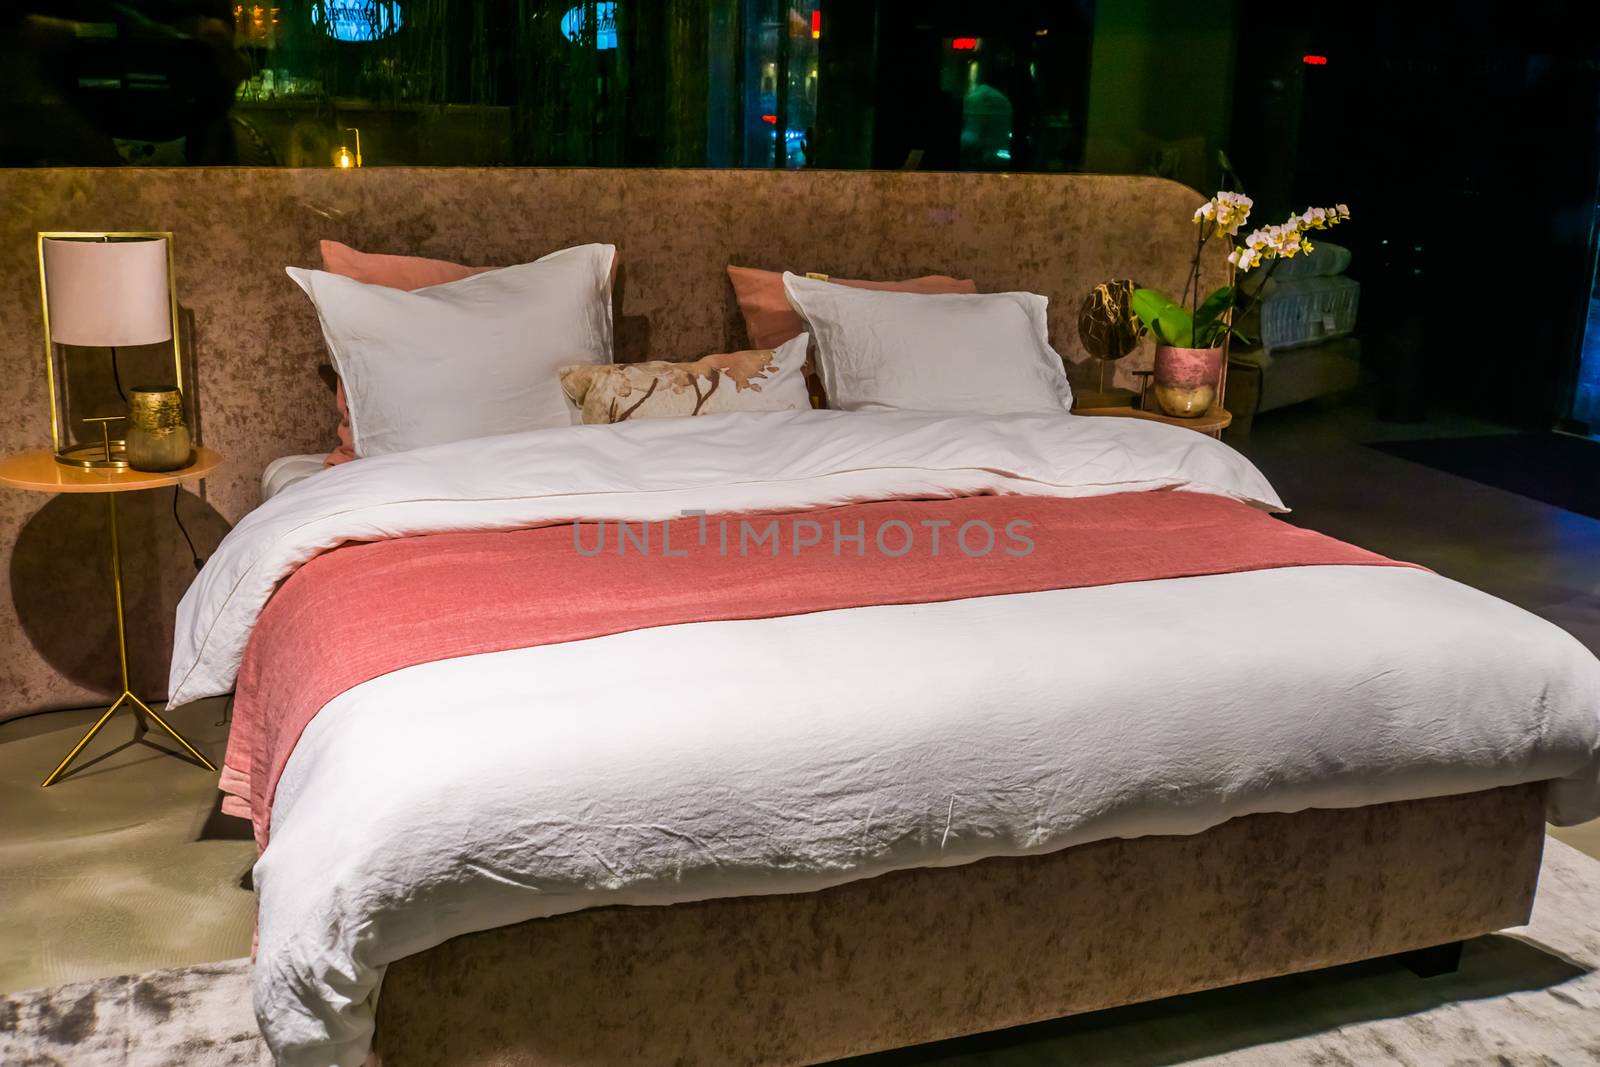 Modern double bed, luxurious bedroom interior, made bed with sheets and pillows by charlottebleijenberg